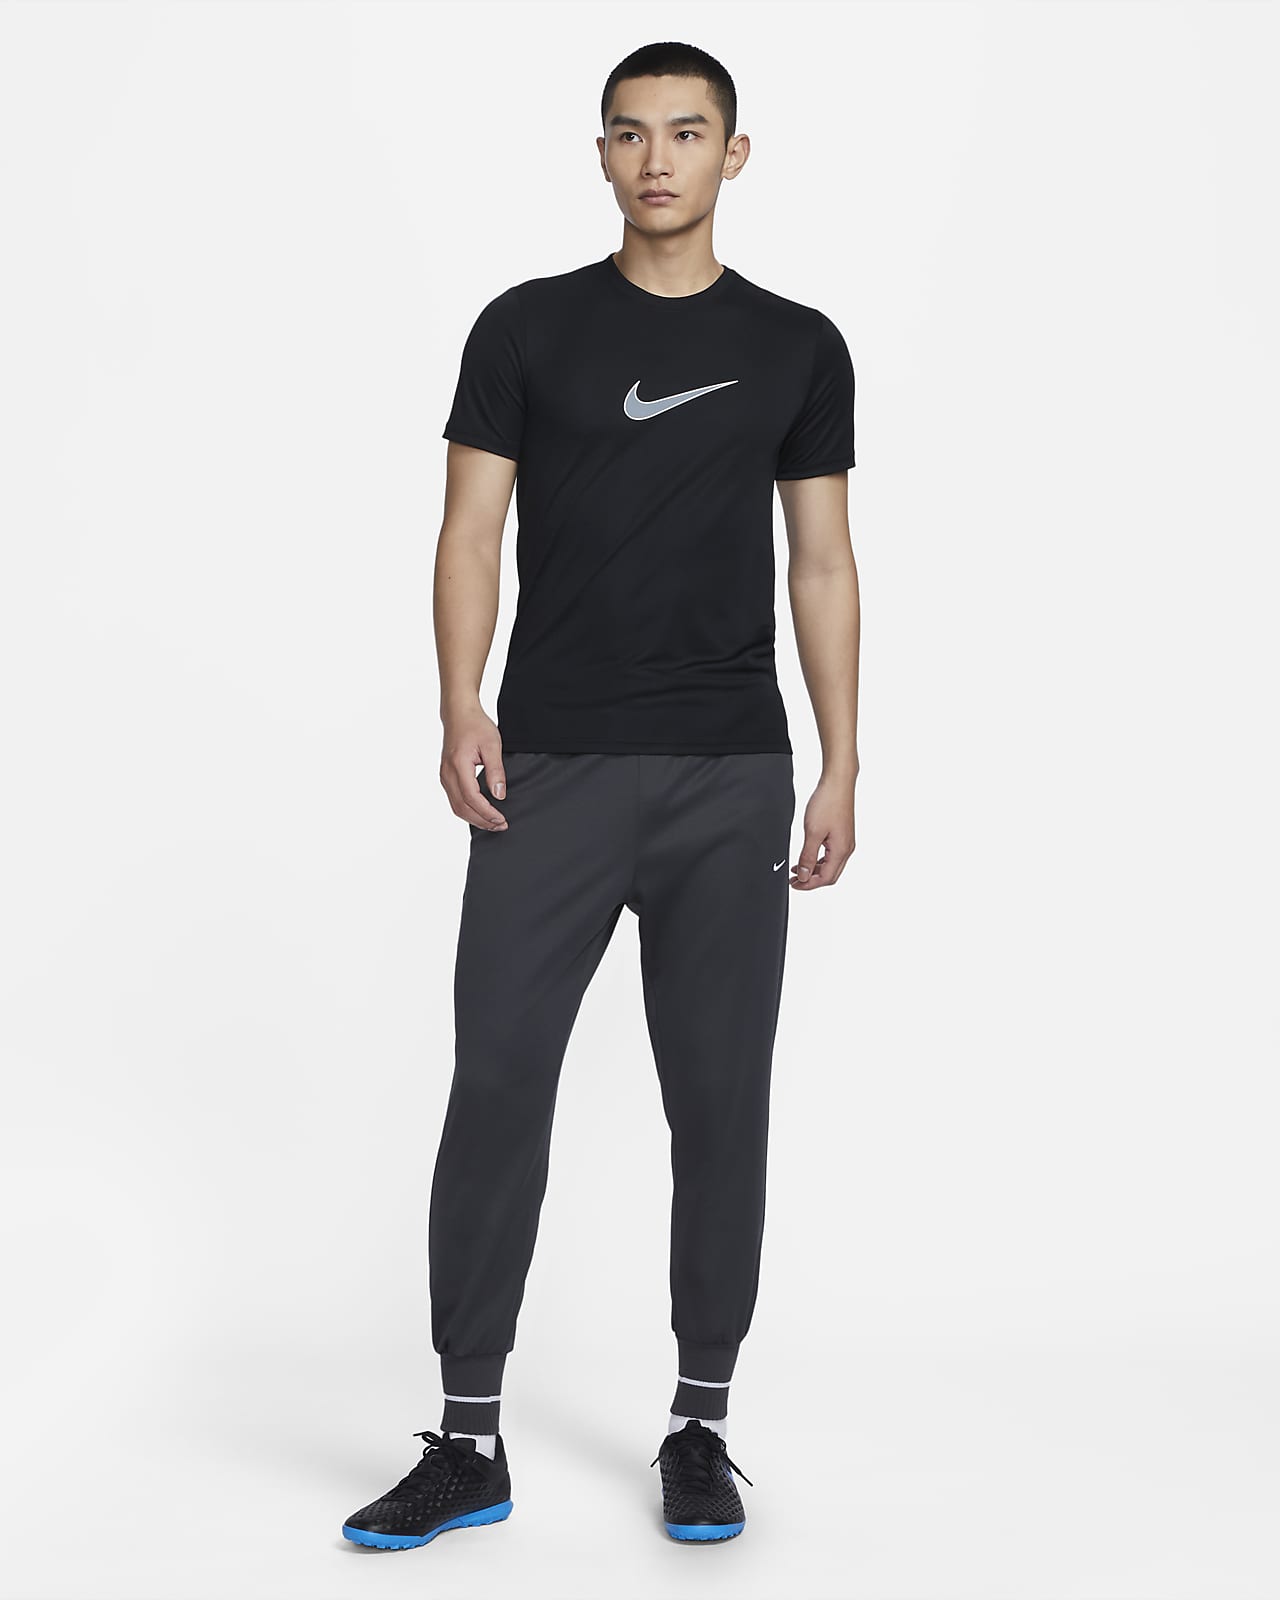 Nike Dri-FIT Academy Short-Sleeve Graphic Football Top.